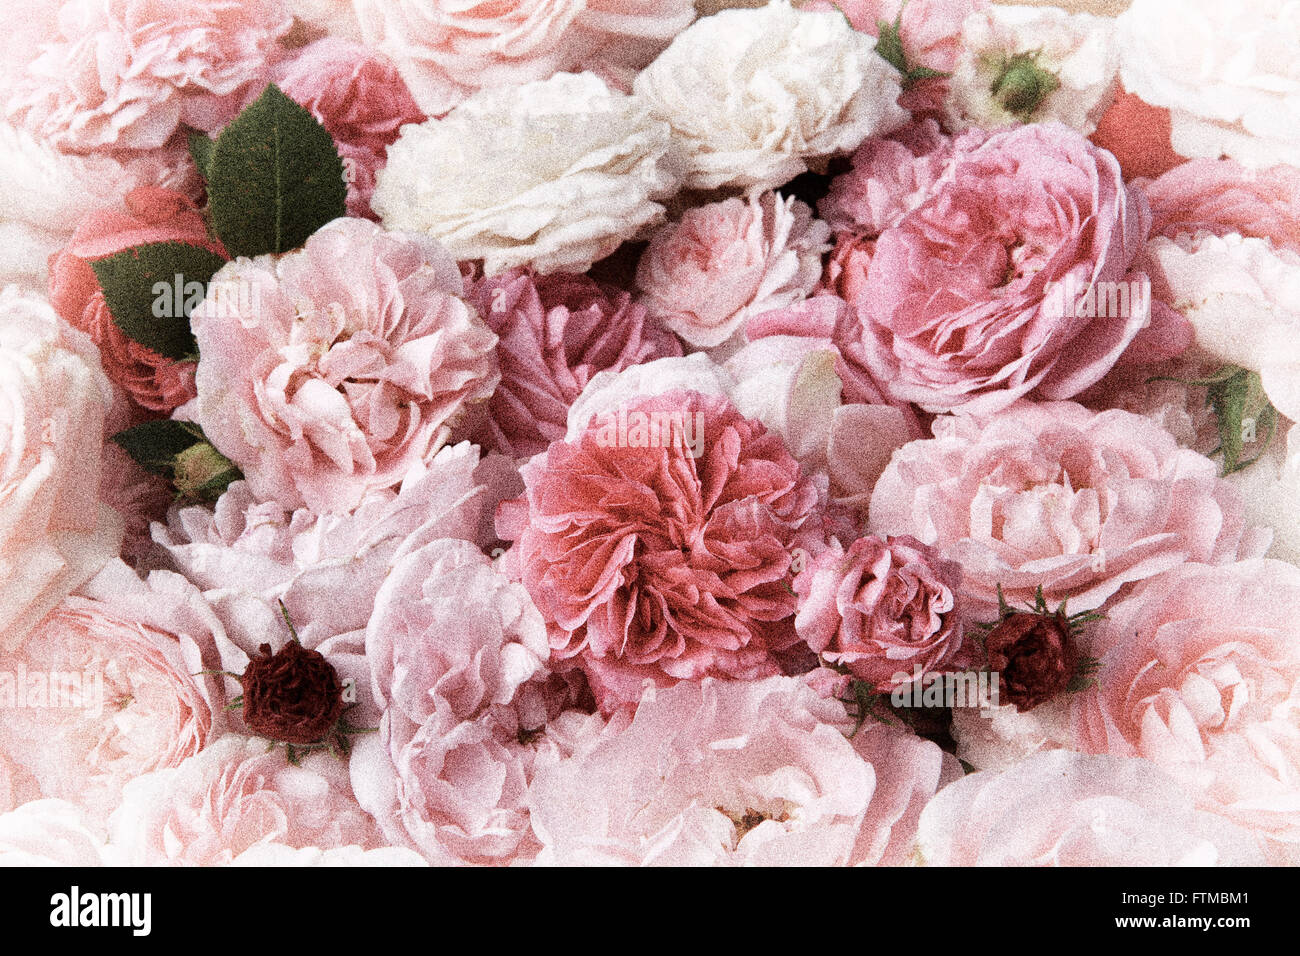 Image of pink vintage roses background texture. Stock Photo